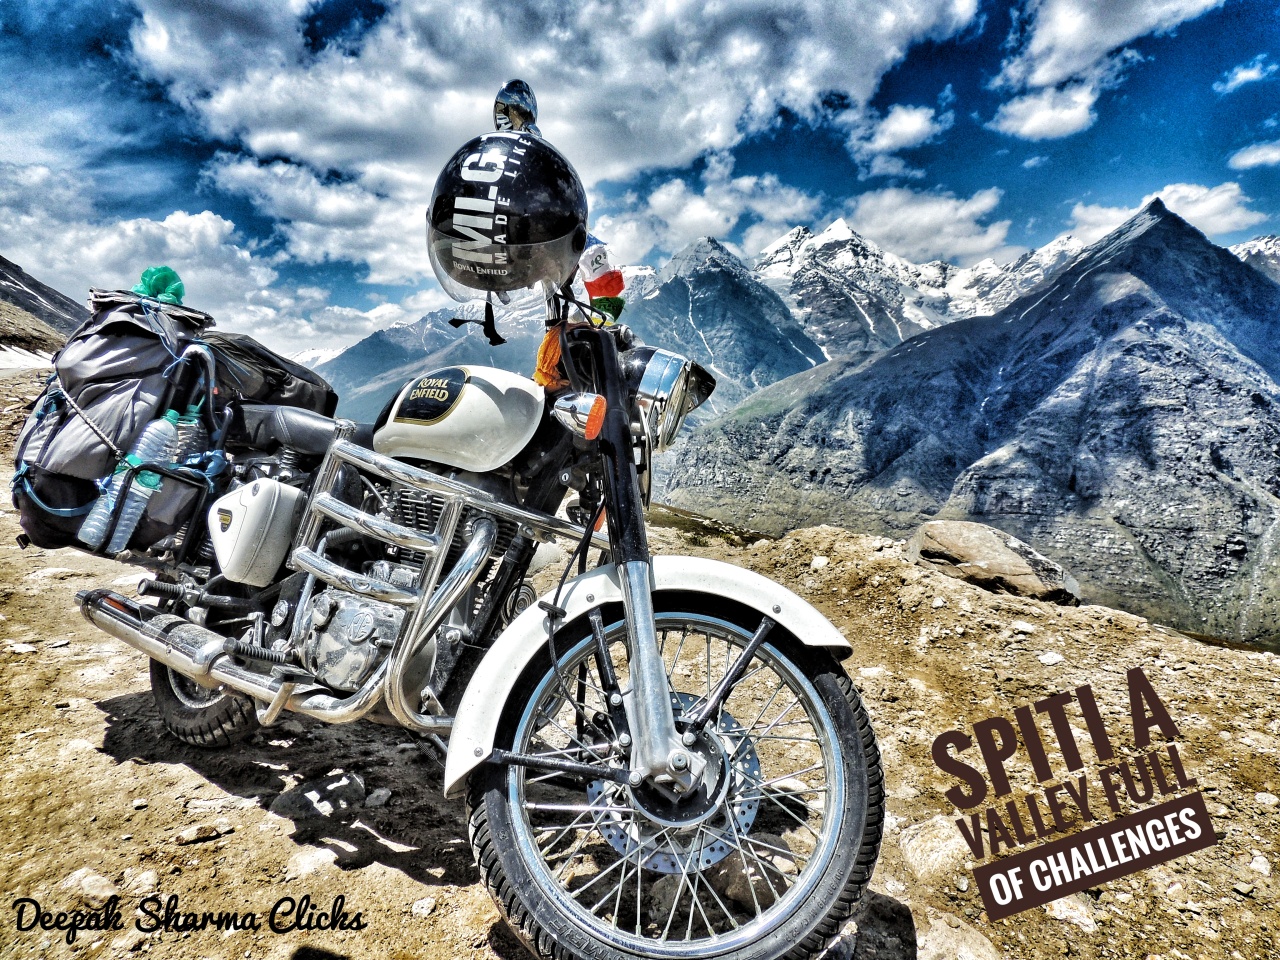 Spiti Bike trip (A Forbidden valley of beauty and challenges)